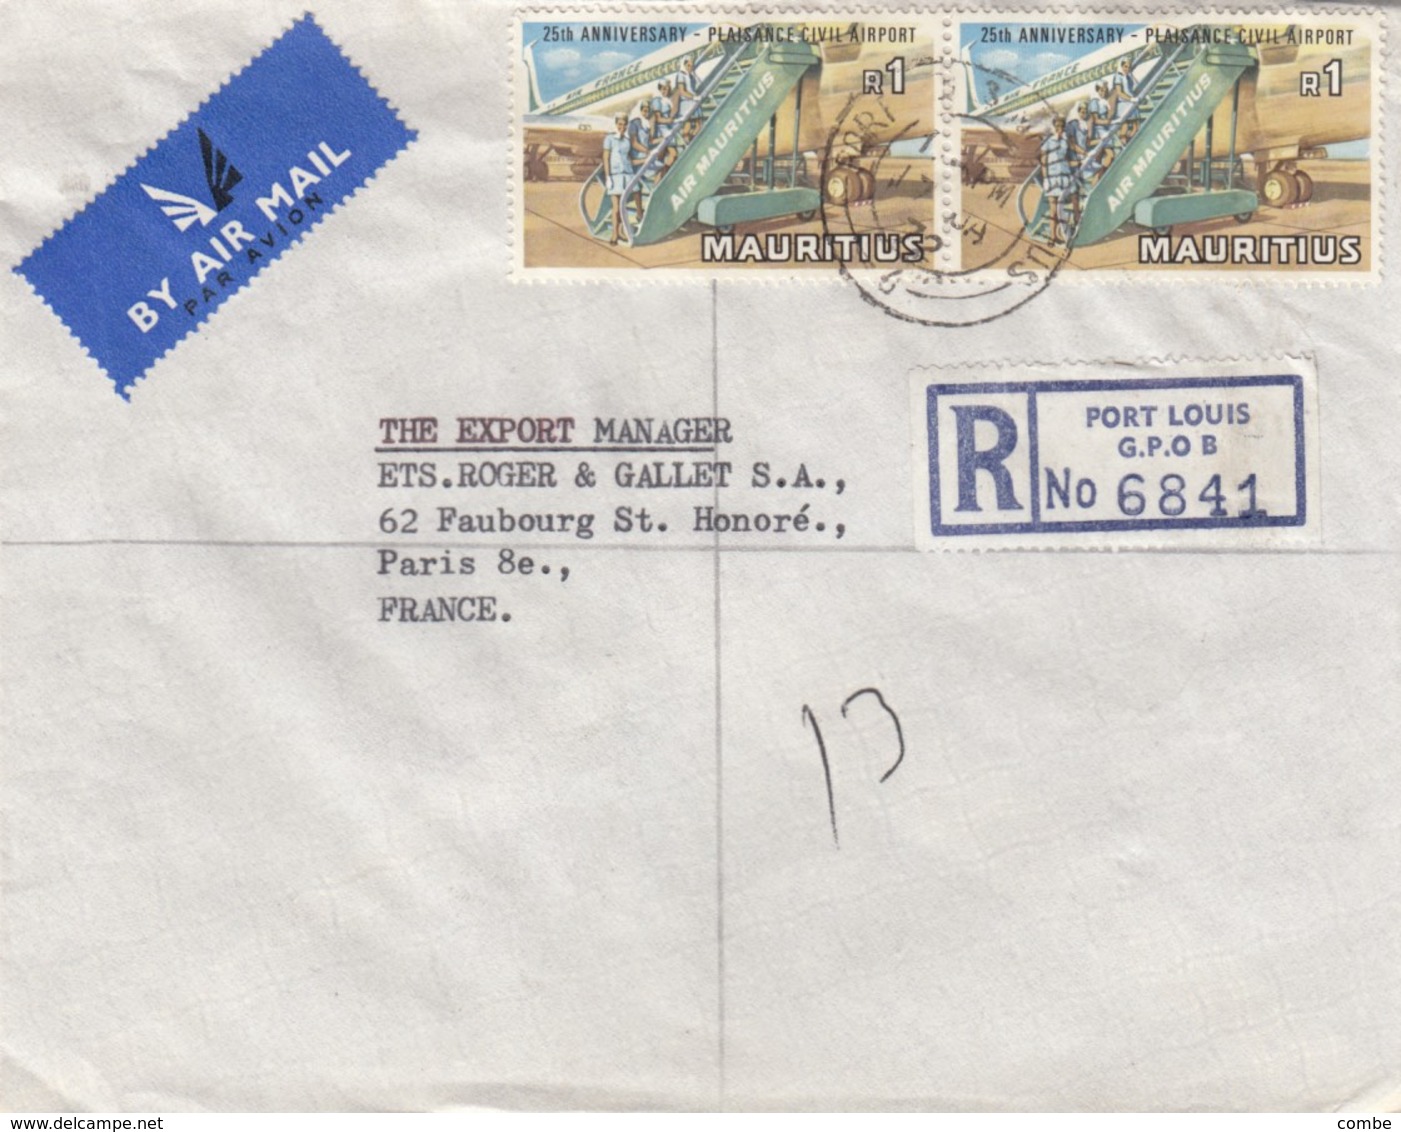 MAURTIUS REGISTERED COVER PORT LOUIS TO FRANCE - Maurice (1968-...)